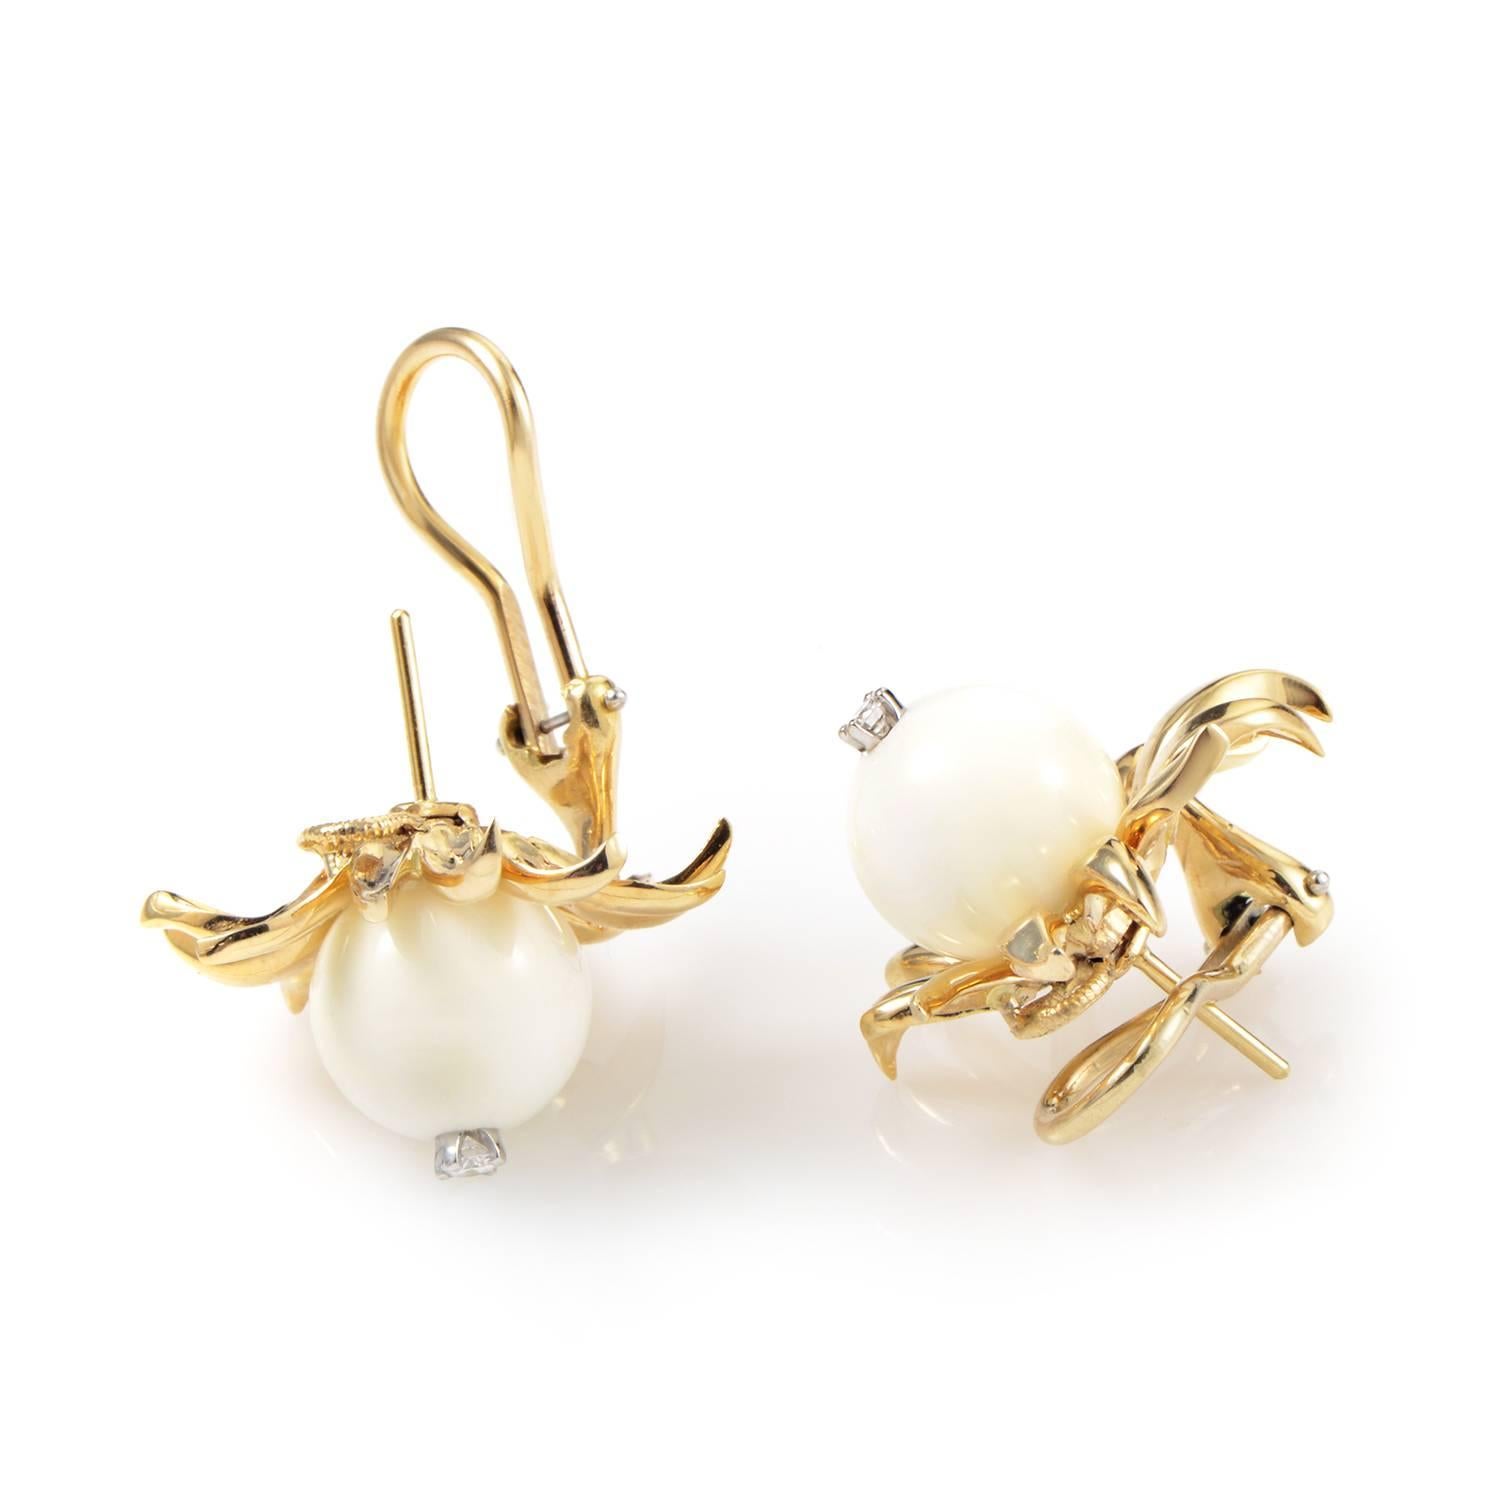 Unfolding like a blooming flower to reveal the angelic beauty and delightful softness of magnificent white onyx stones complemented by sparkling diamonds totaling 0.10ct, the 18K yellow gold sets a wonderful tone in these charming earrings designed